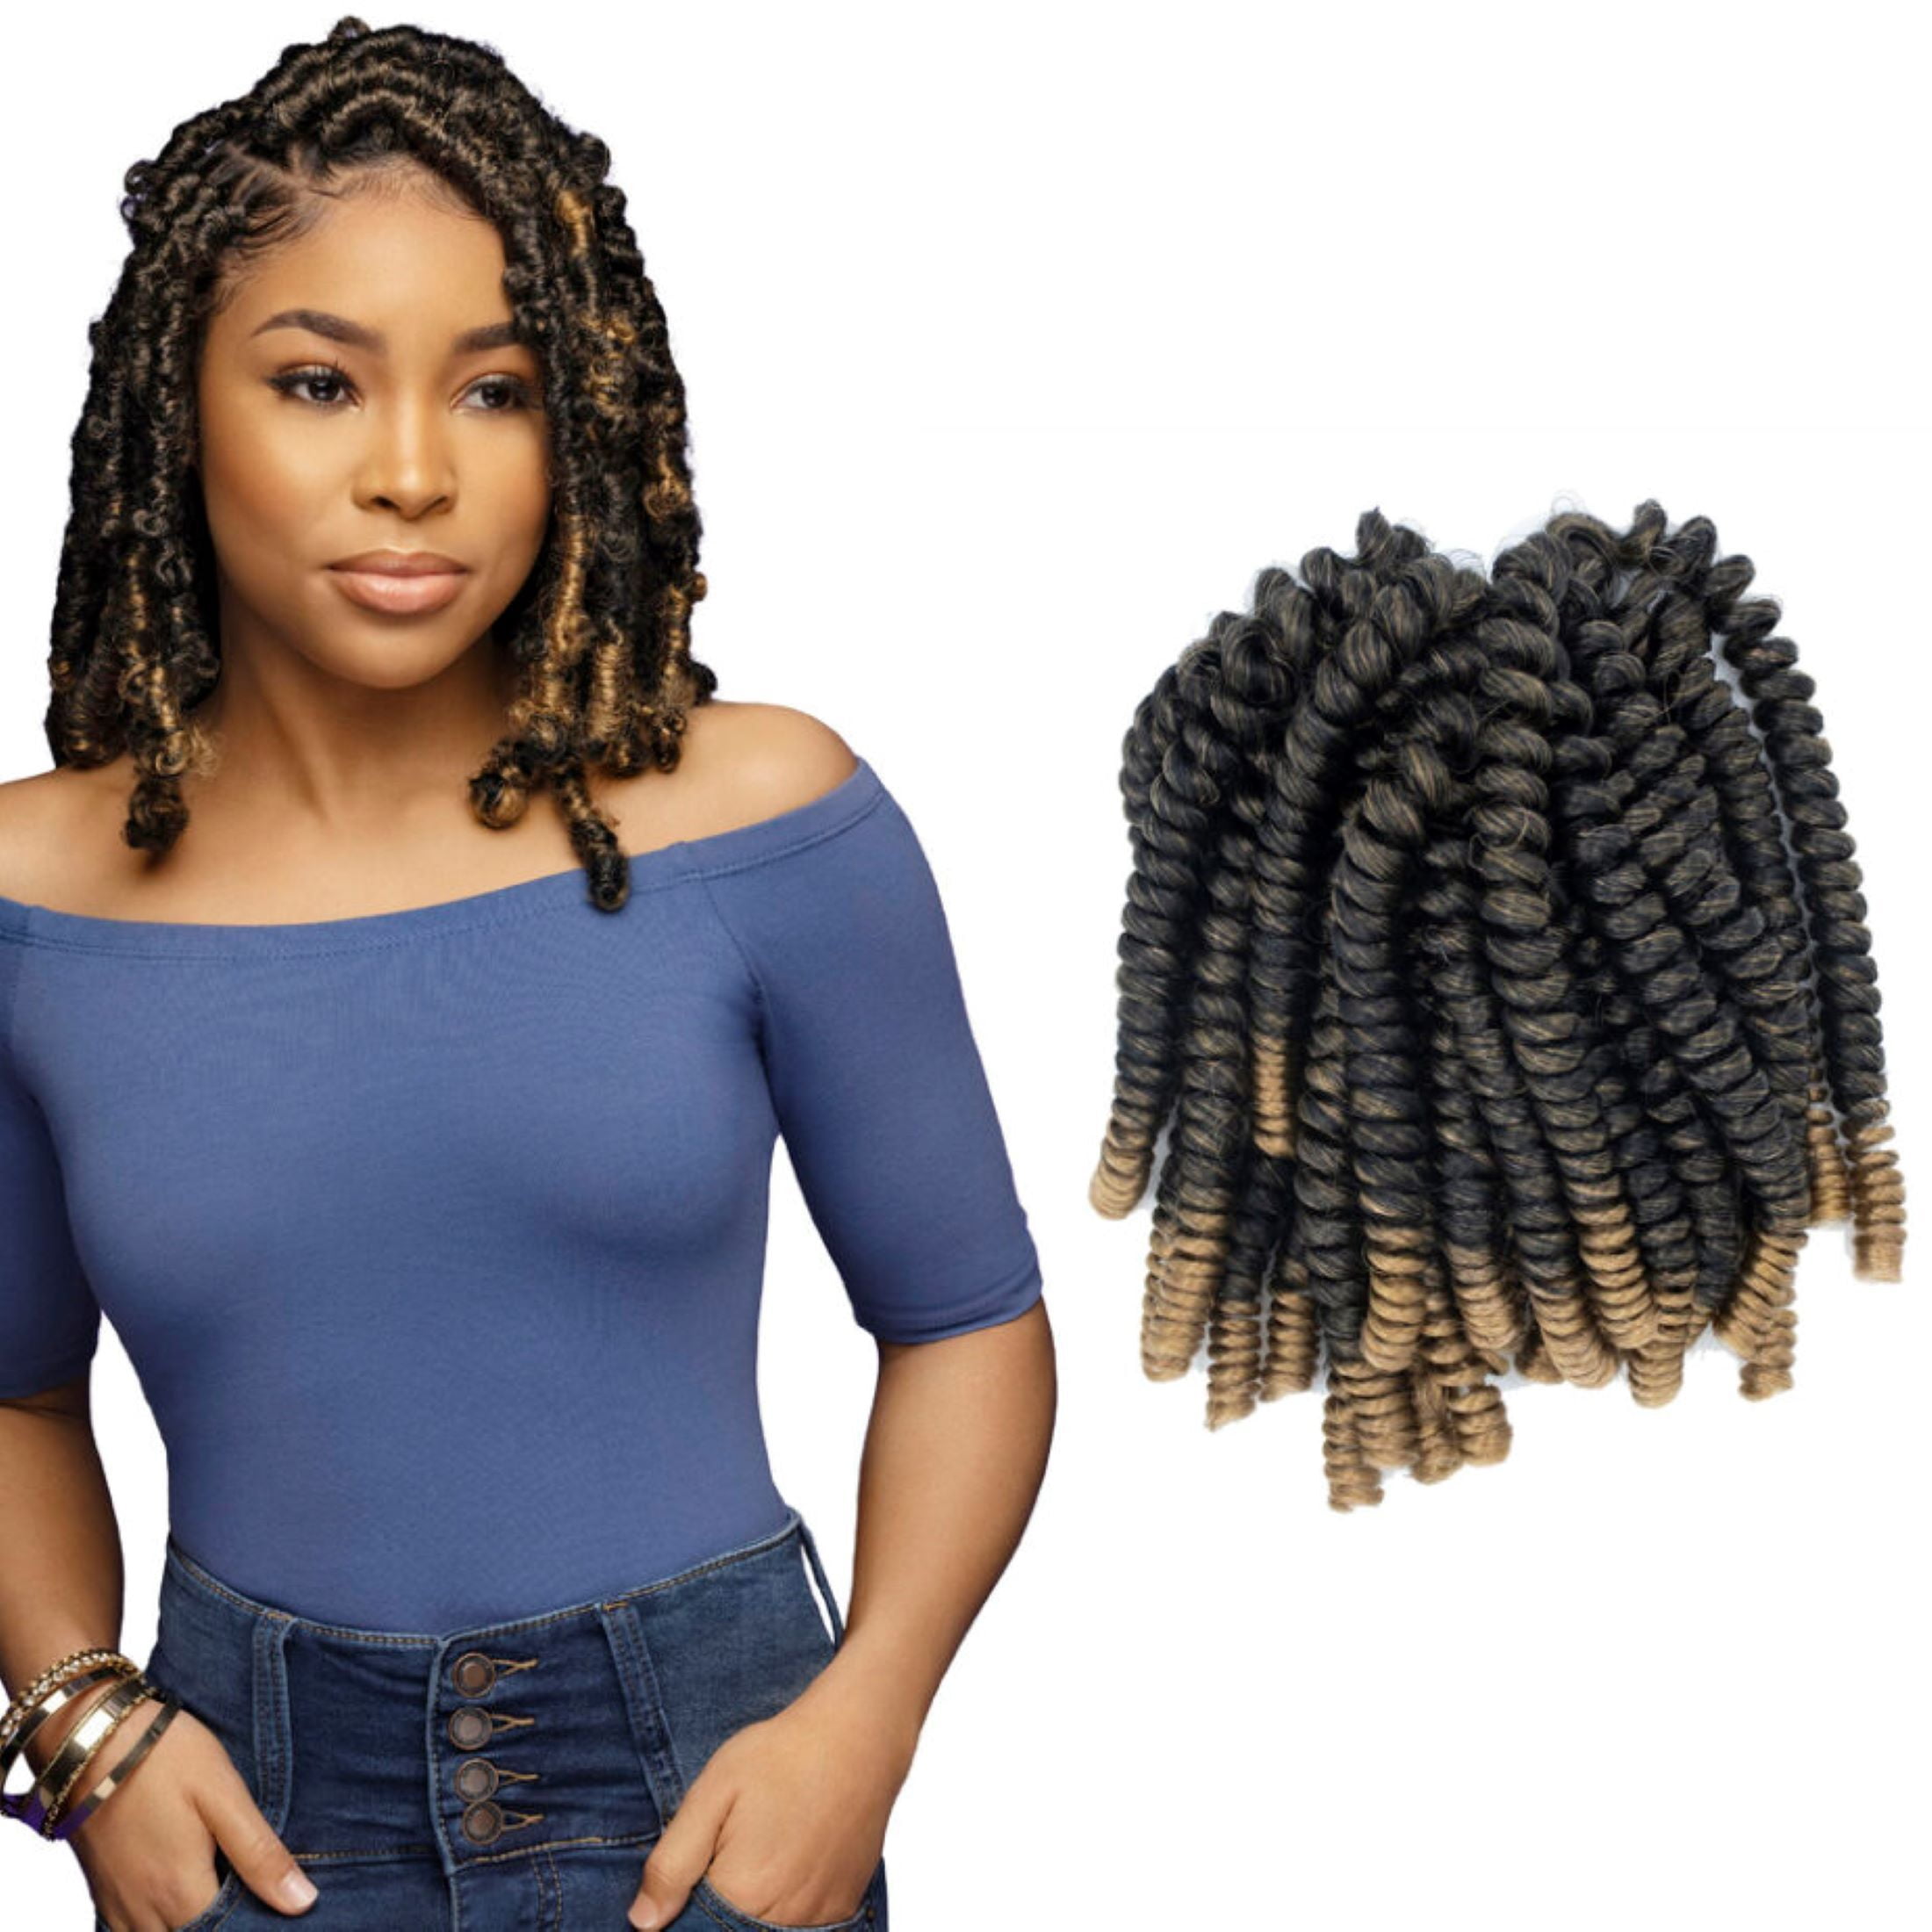 Passion Twist Value Pack - Darling